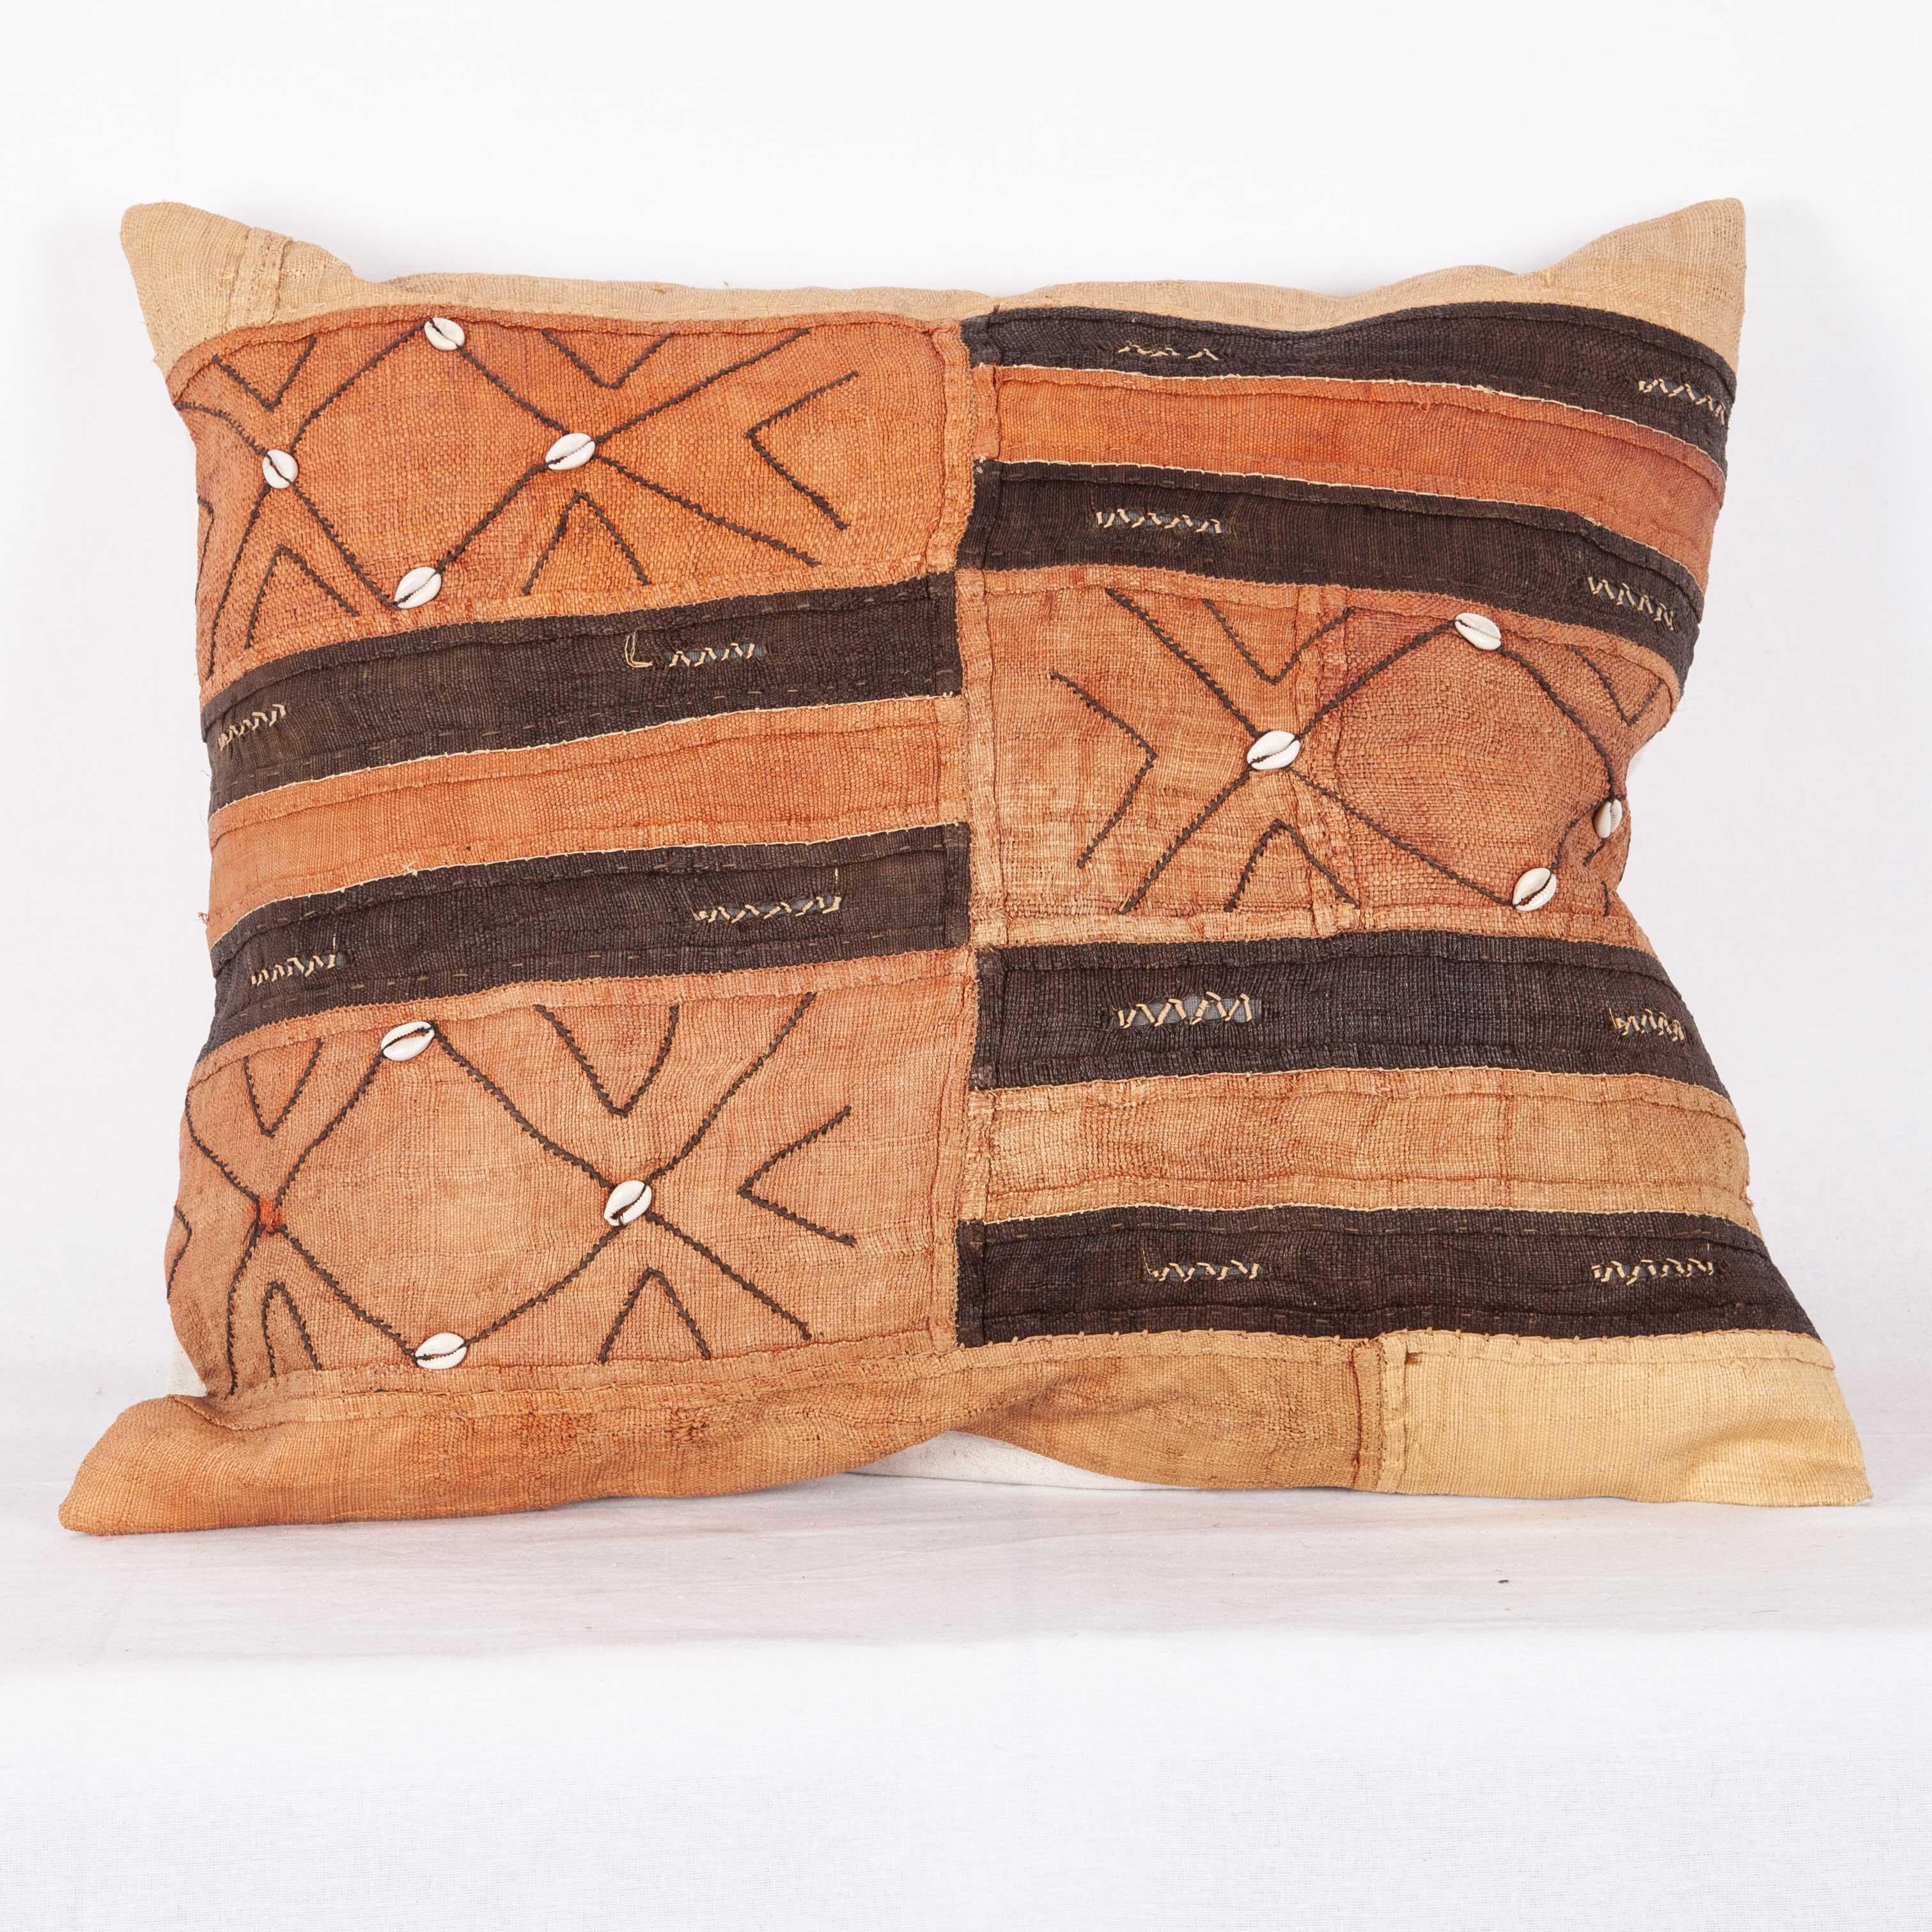 Vintage African Kuba Cloth Pillow Cases, Mid-20th Century For Sale 6